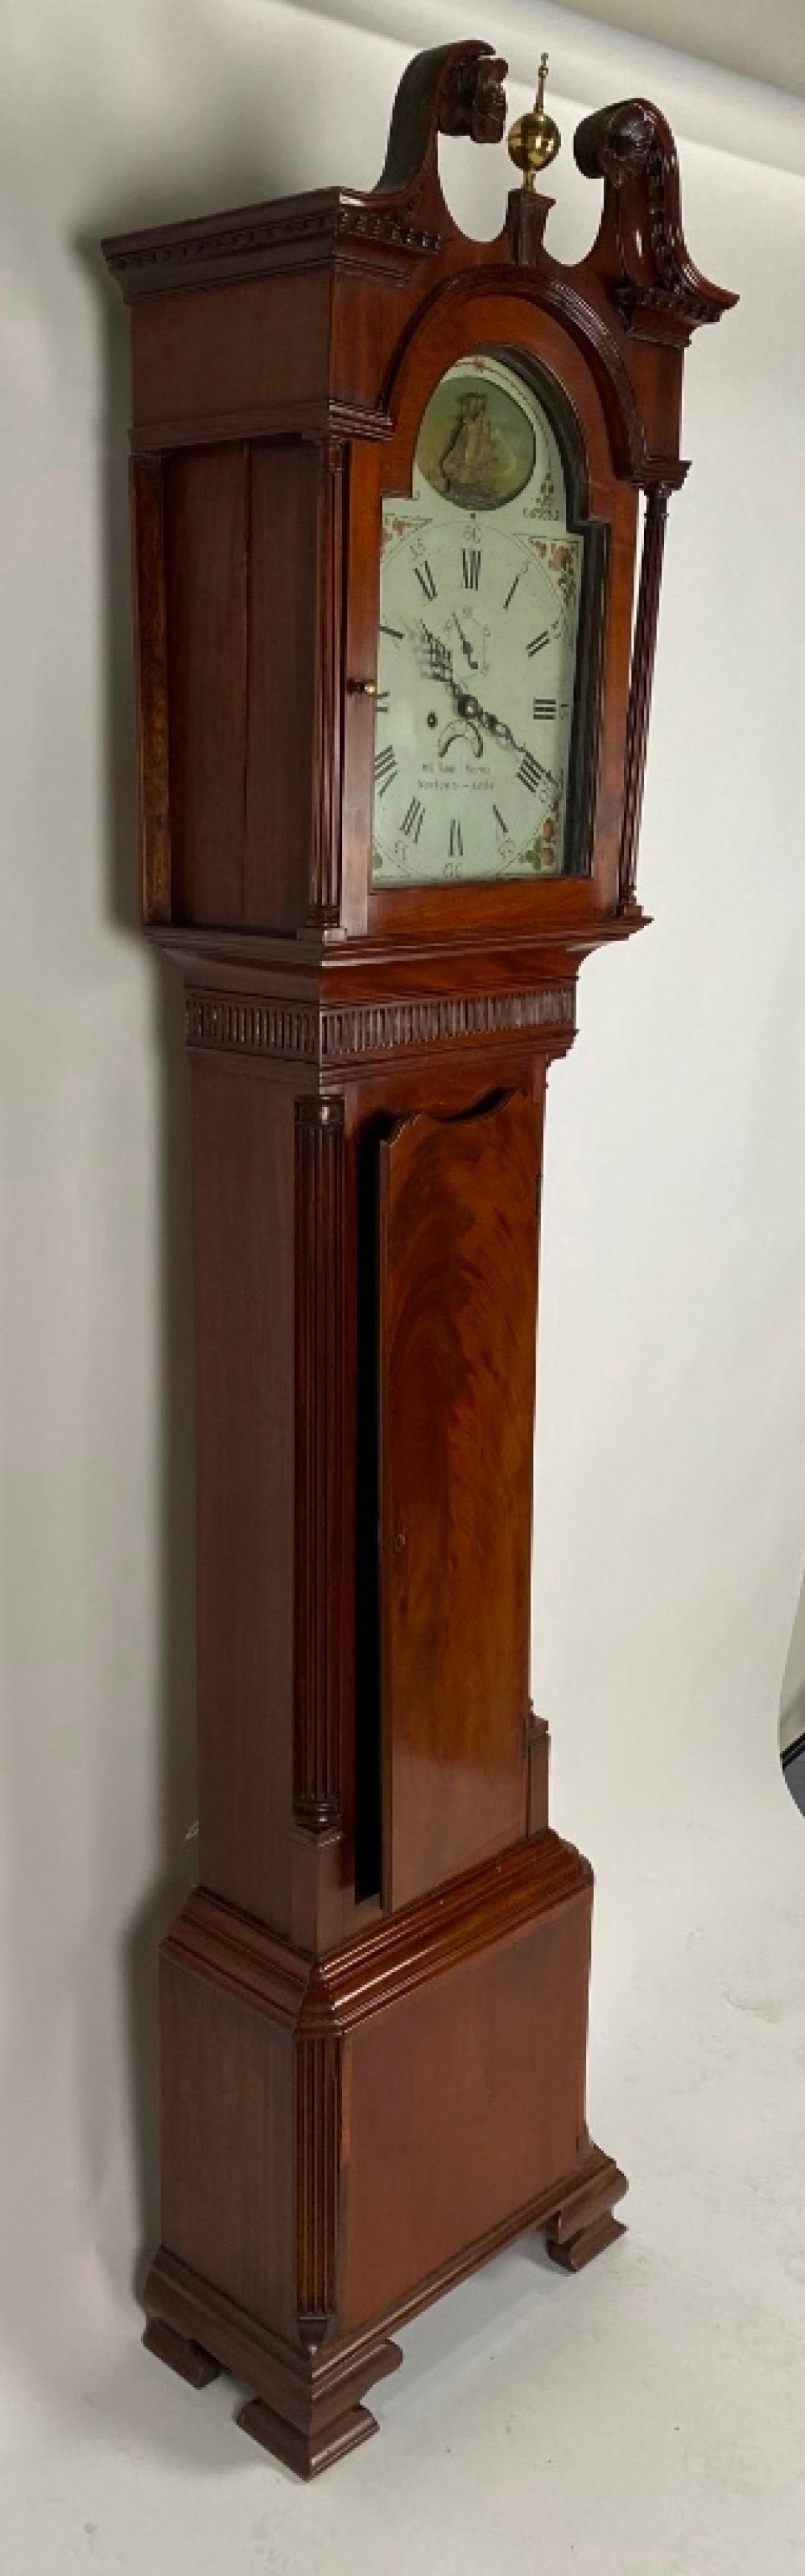 Northern Irish 18th Century Chippendale Tall Case Clock with Rocking Ship Automaton For Sale